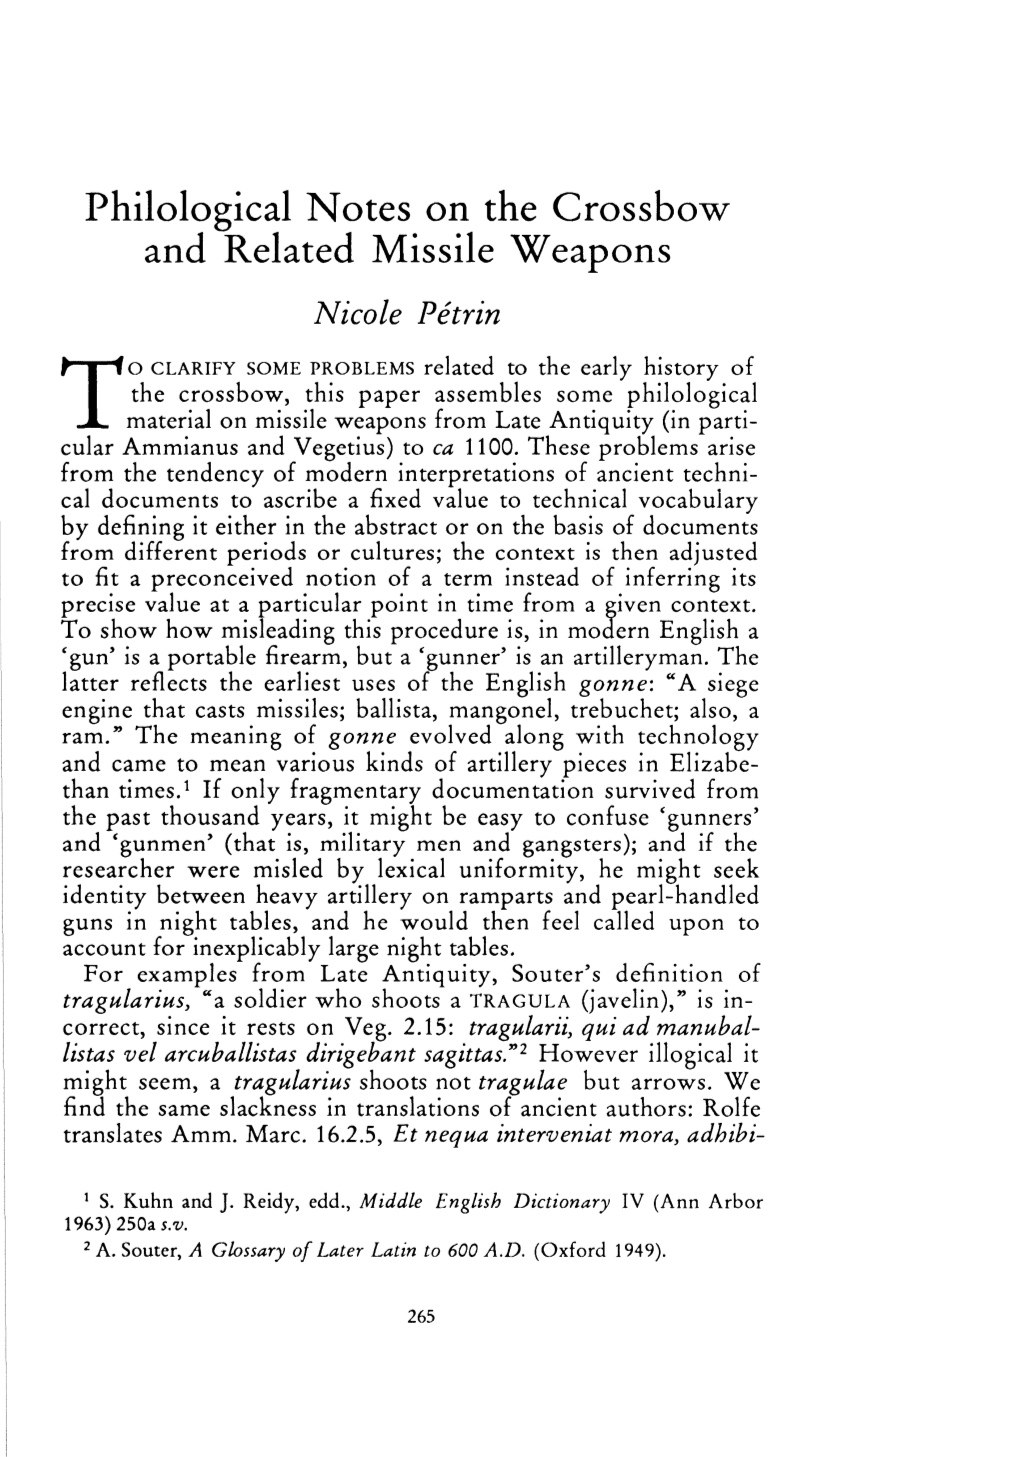 Philological Notes on the Crossbow and Related Missile Weapons , Greek, Roman and Byzantine Studies, 33:3 (1992:Fall) P.265